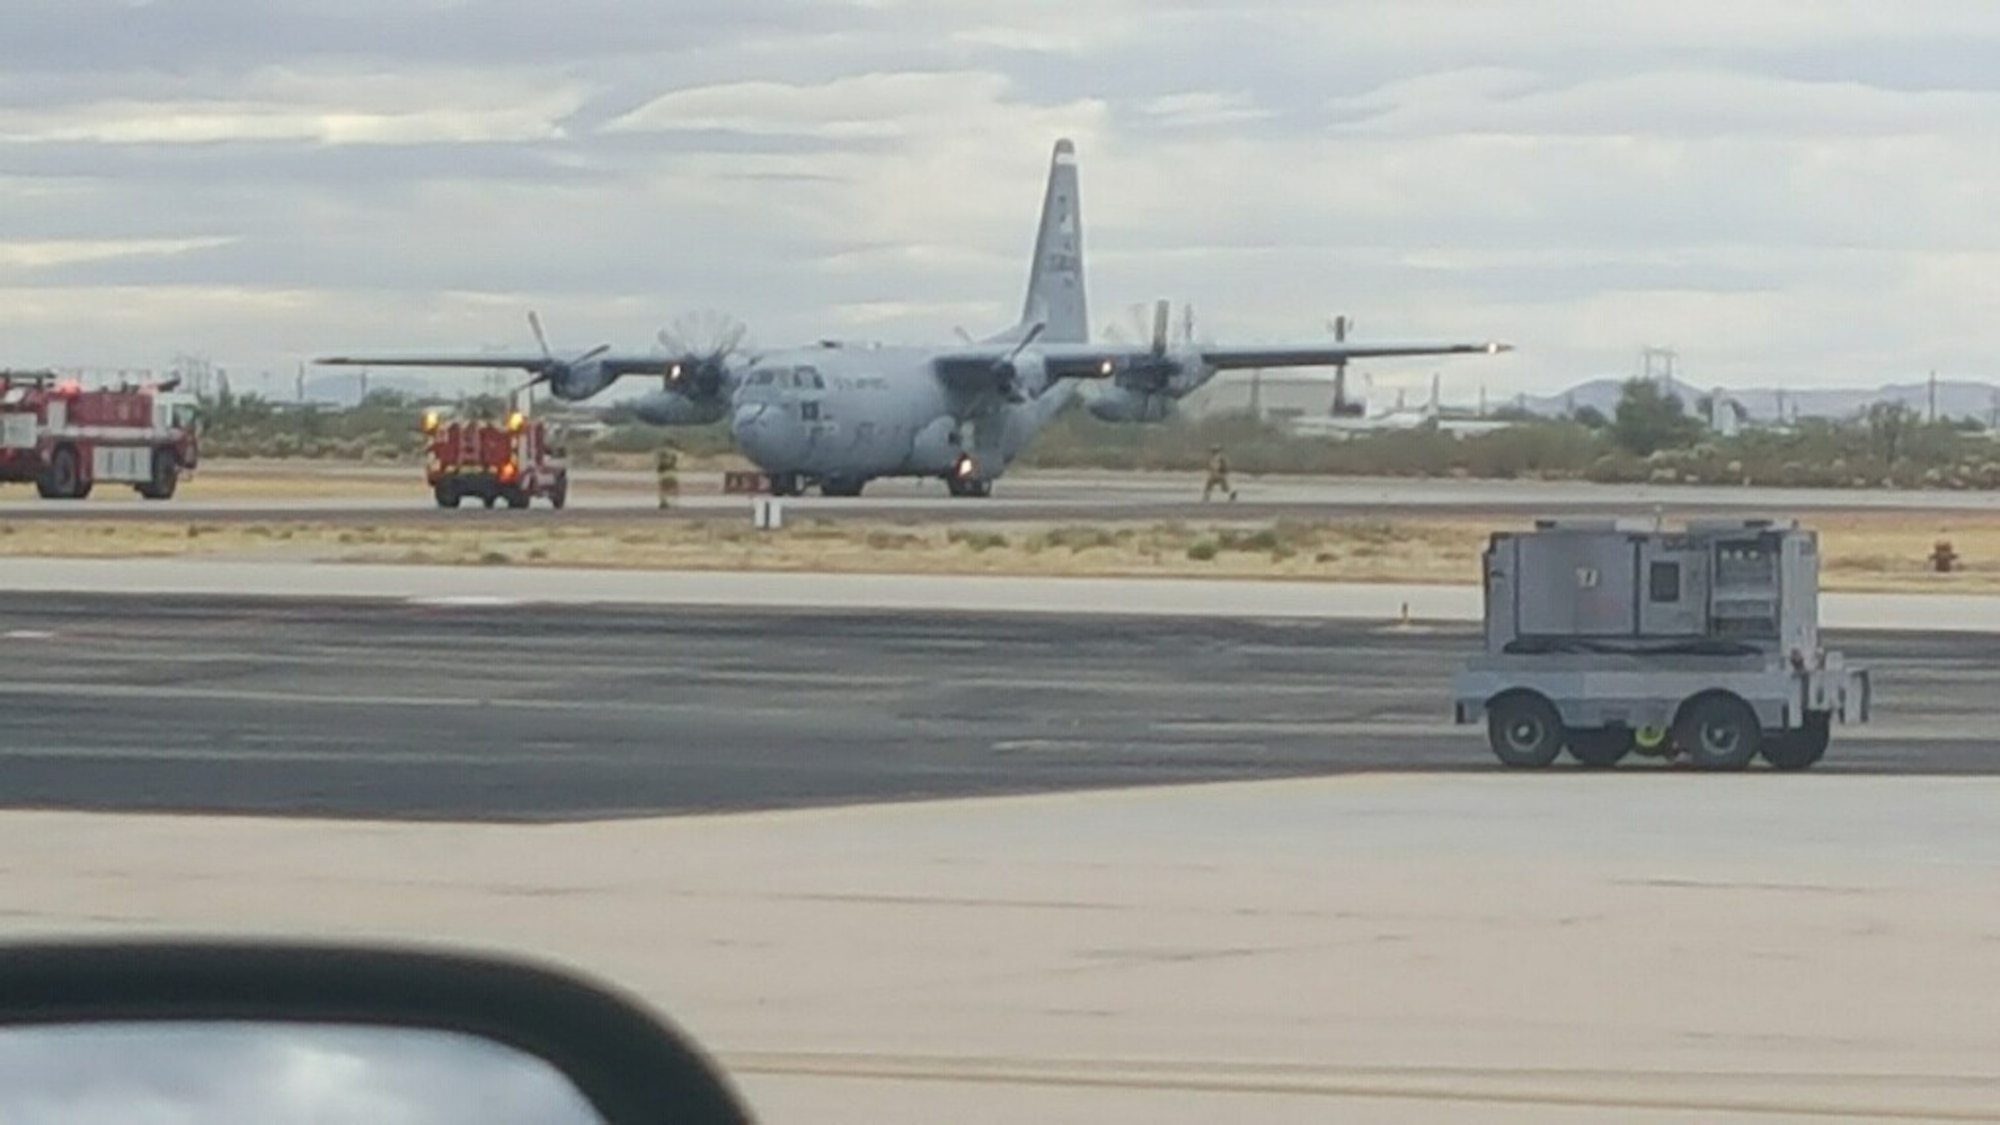 The last C-130 AMP arrives at Davis-Monthan AFB with two failed engines, marking the end of the final flight for the AMP.